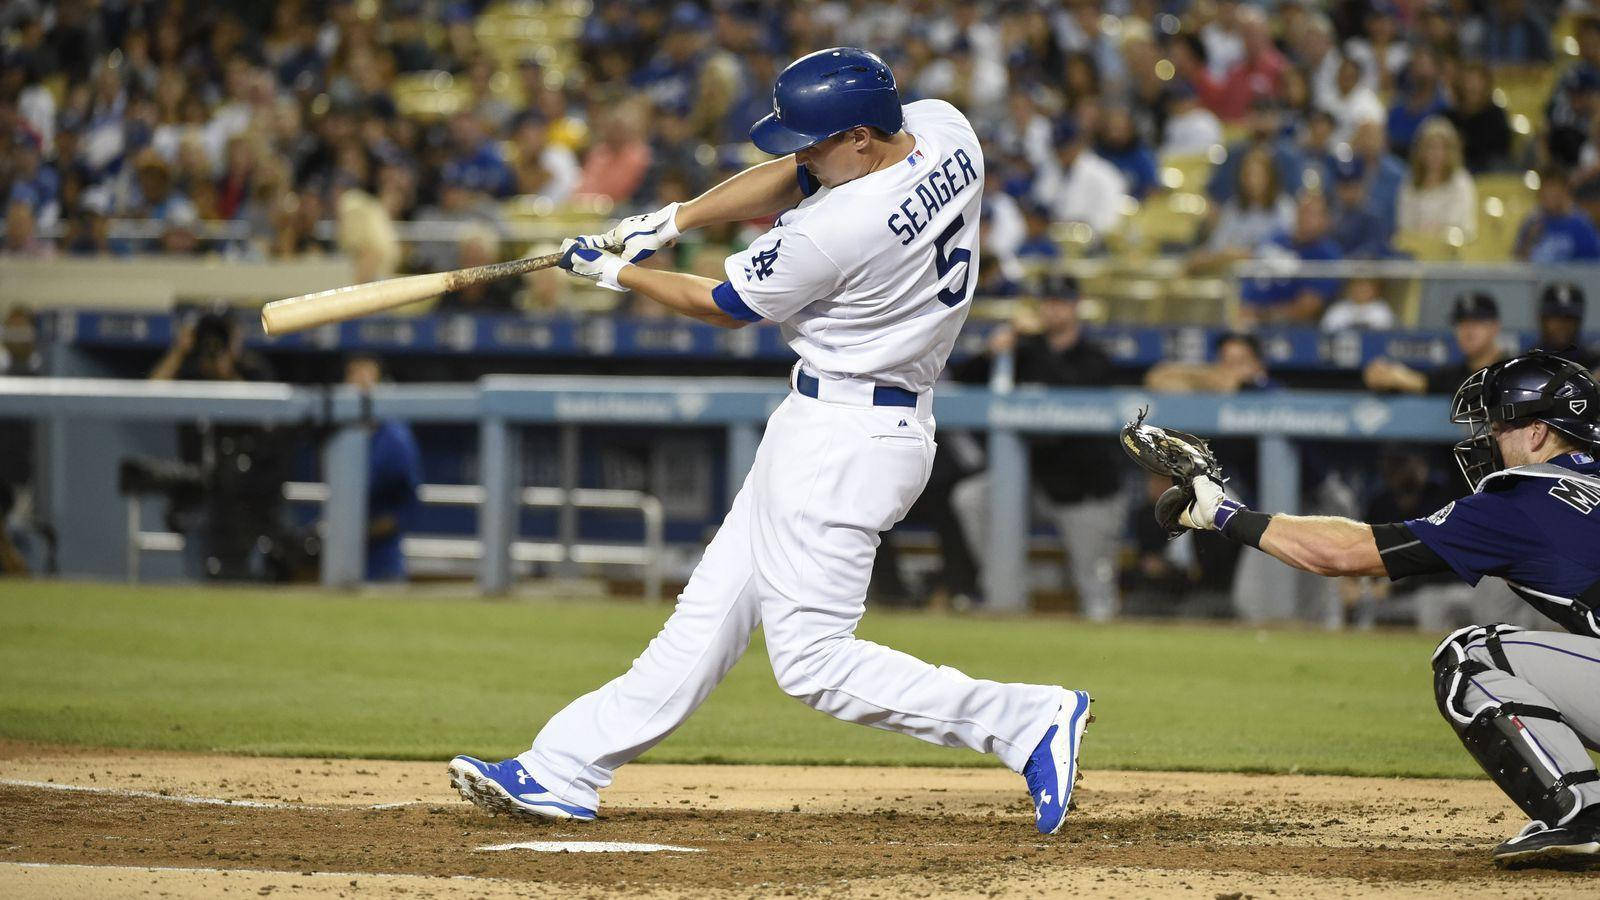 Corey Seager Swinging While Skipping Background